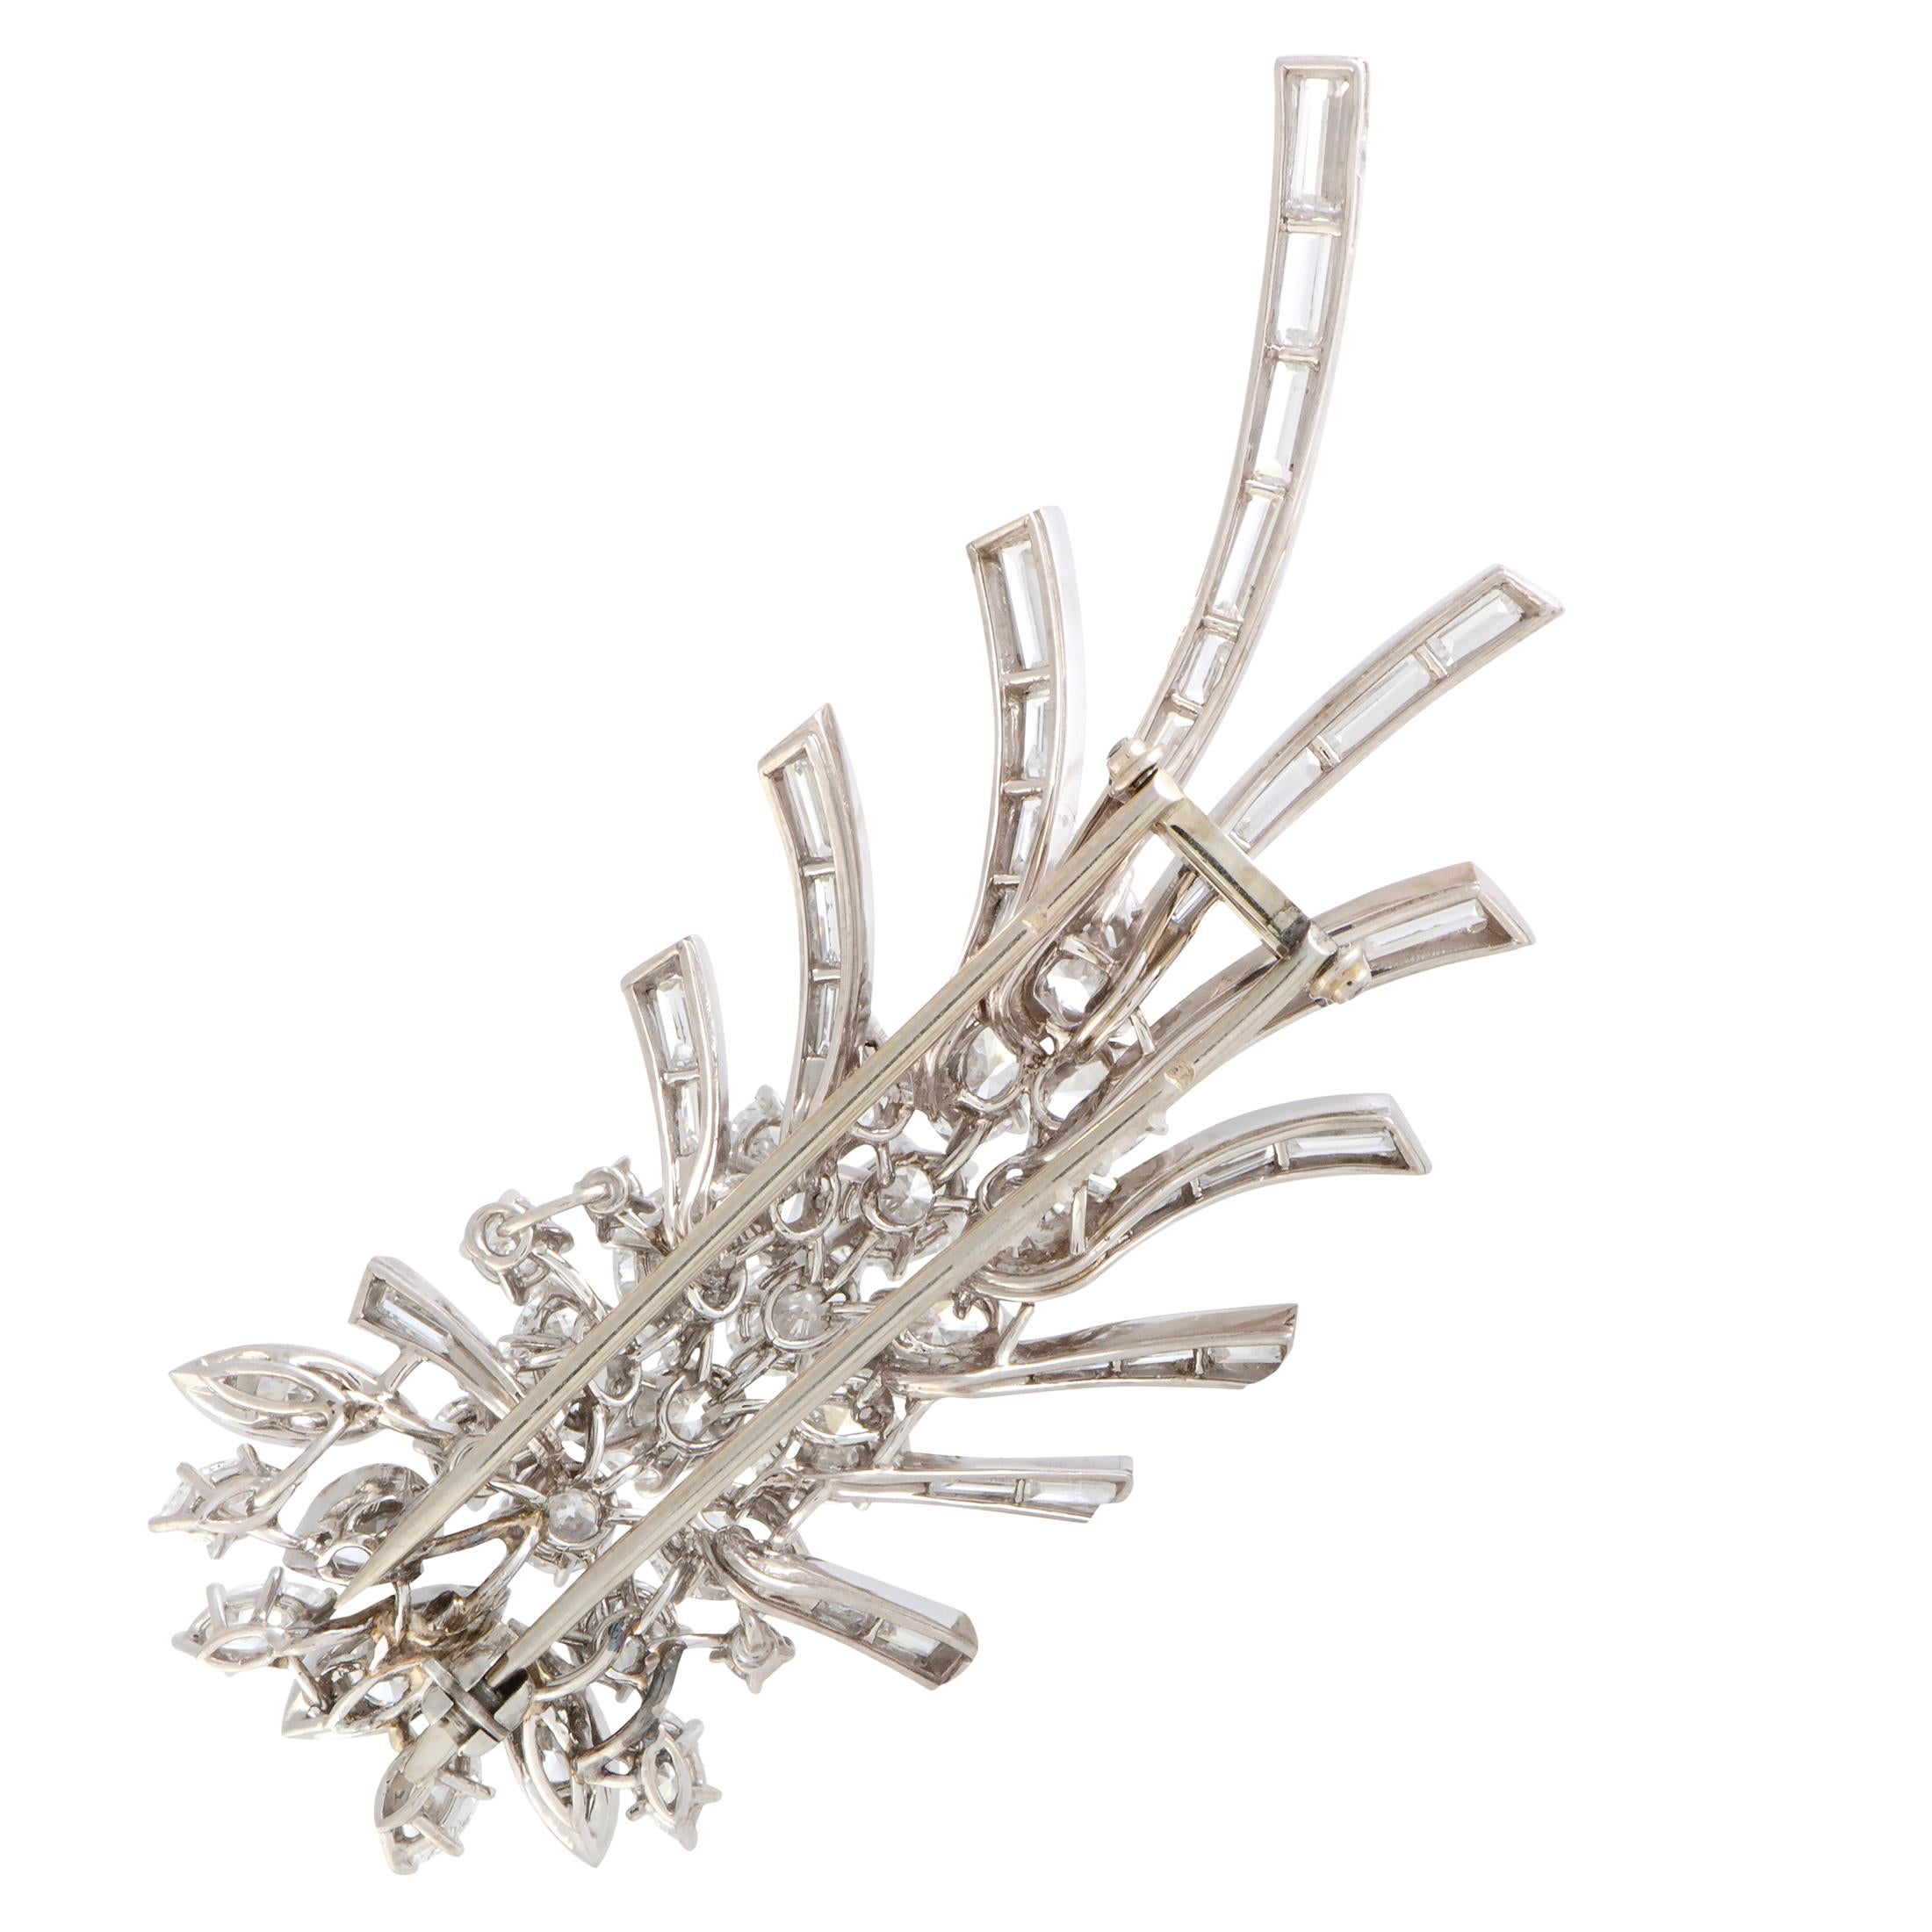 Accentuate your ensemble in a stunningly extravagant fashion with this fabulous brooch that boasts an incredibly luxurious diamond décor, offering  a look of utmost prestige and refinement. The brooch is splendidly crafted from gleaming platinum and